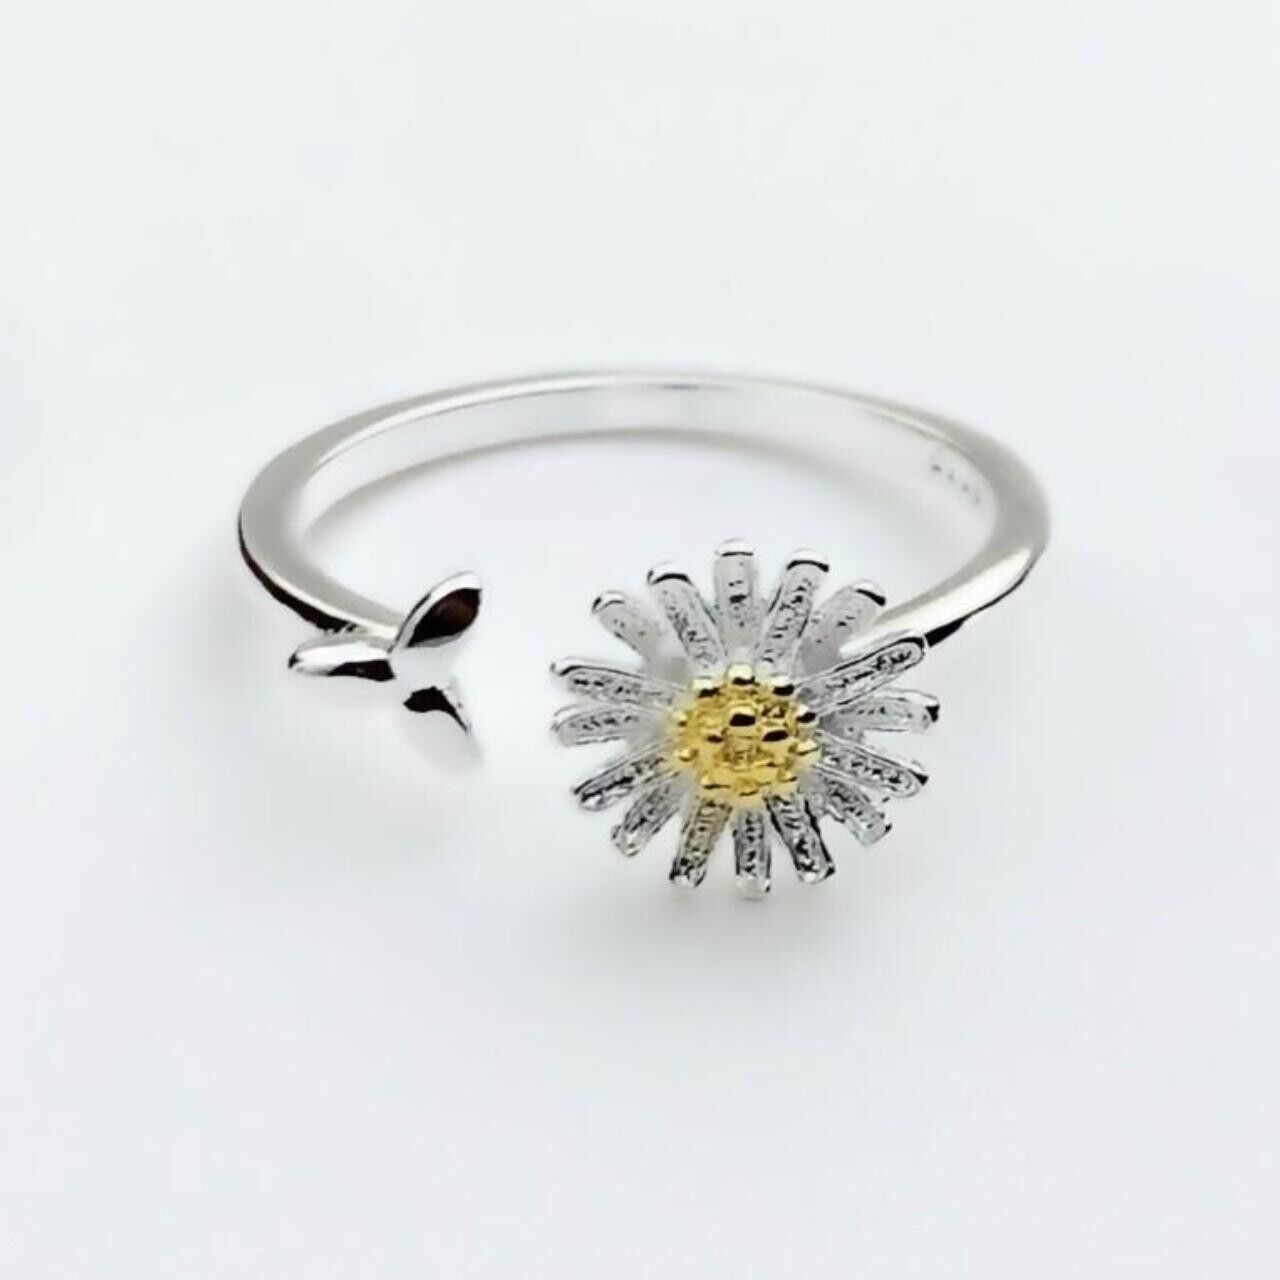 Genuine 925 Sterling Silver Daisy Flower Floral Dainty Thin Band Adjustable Ring